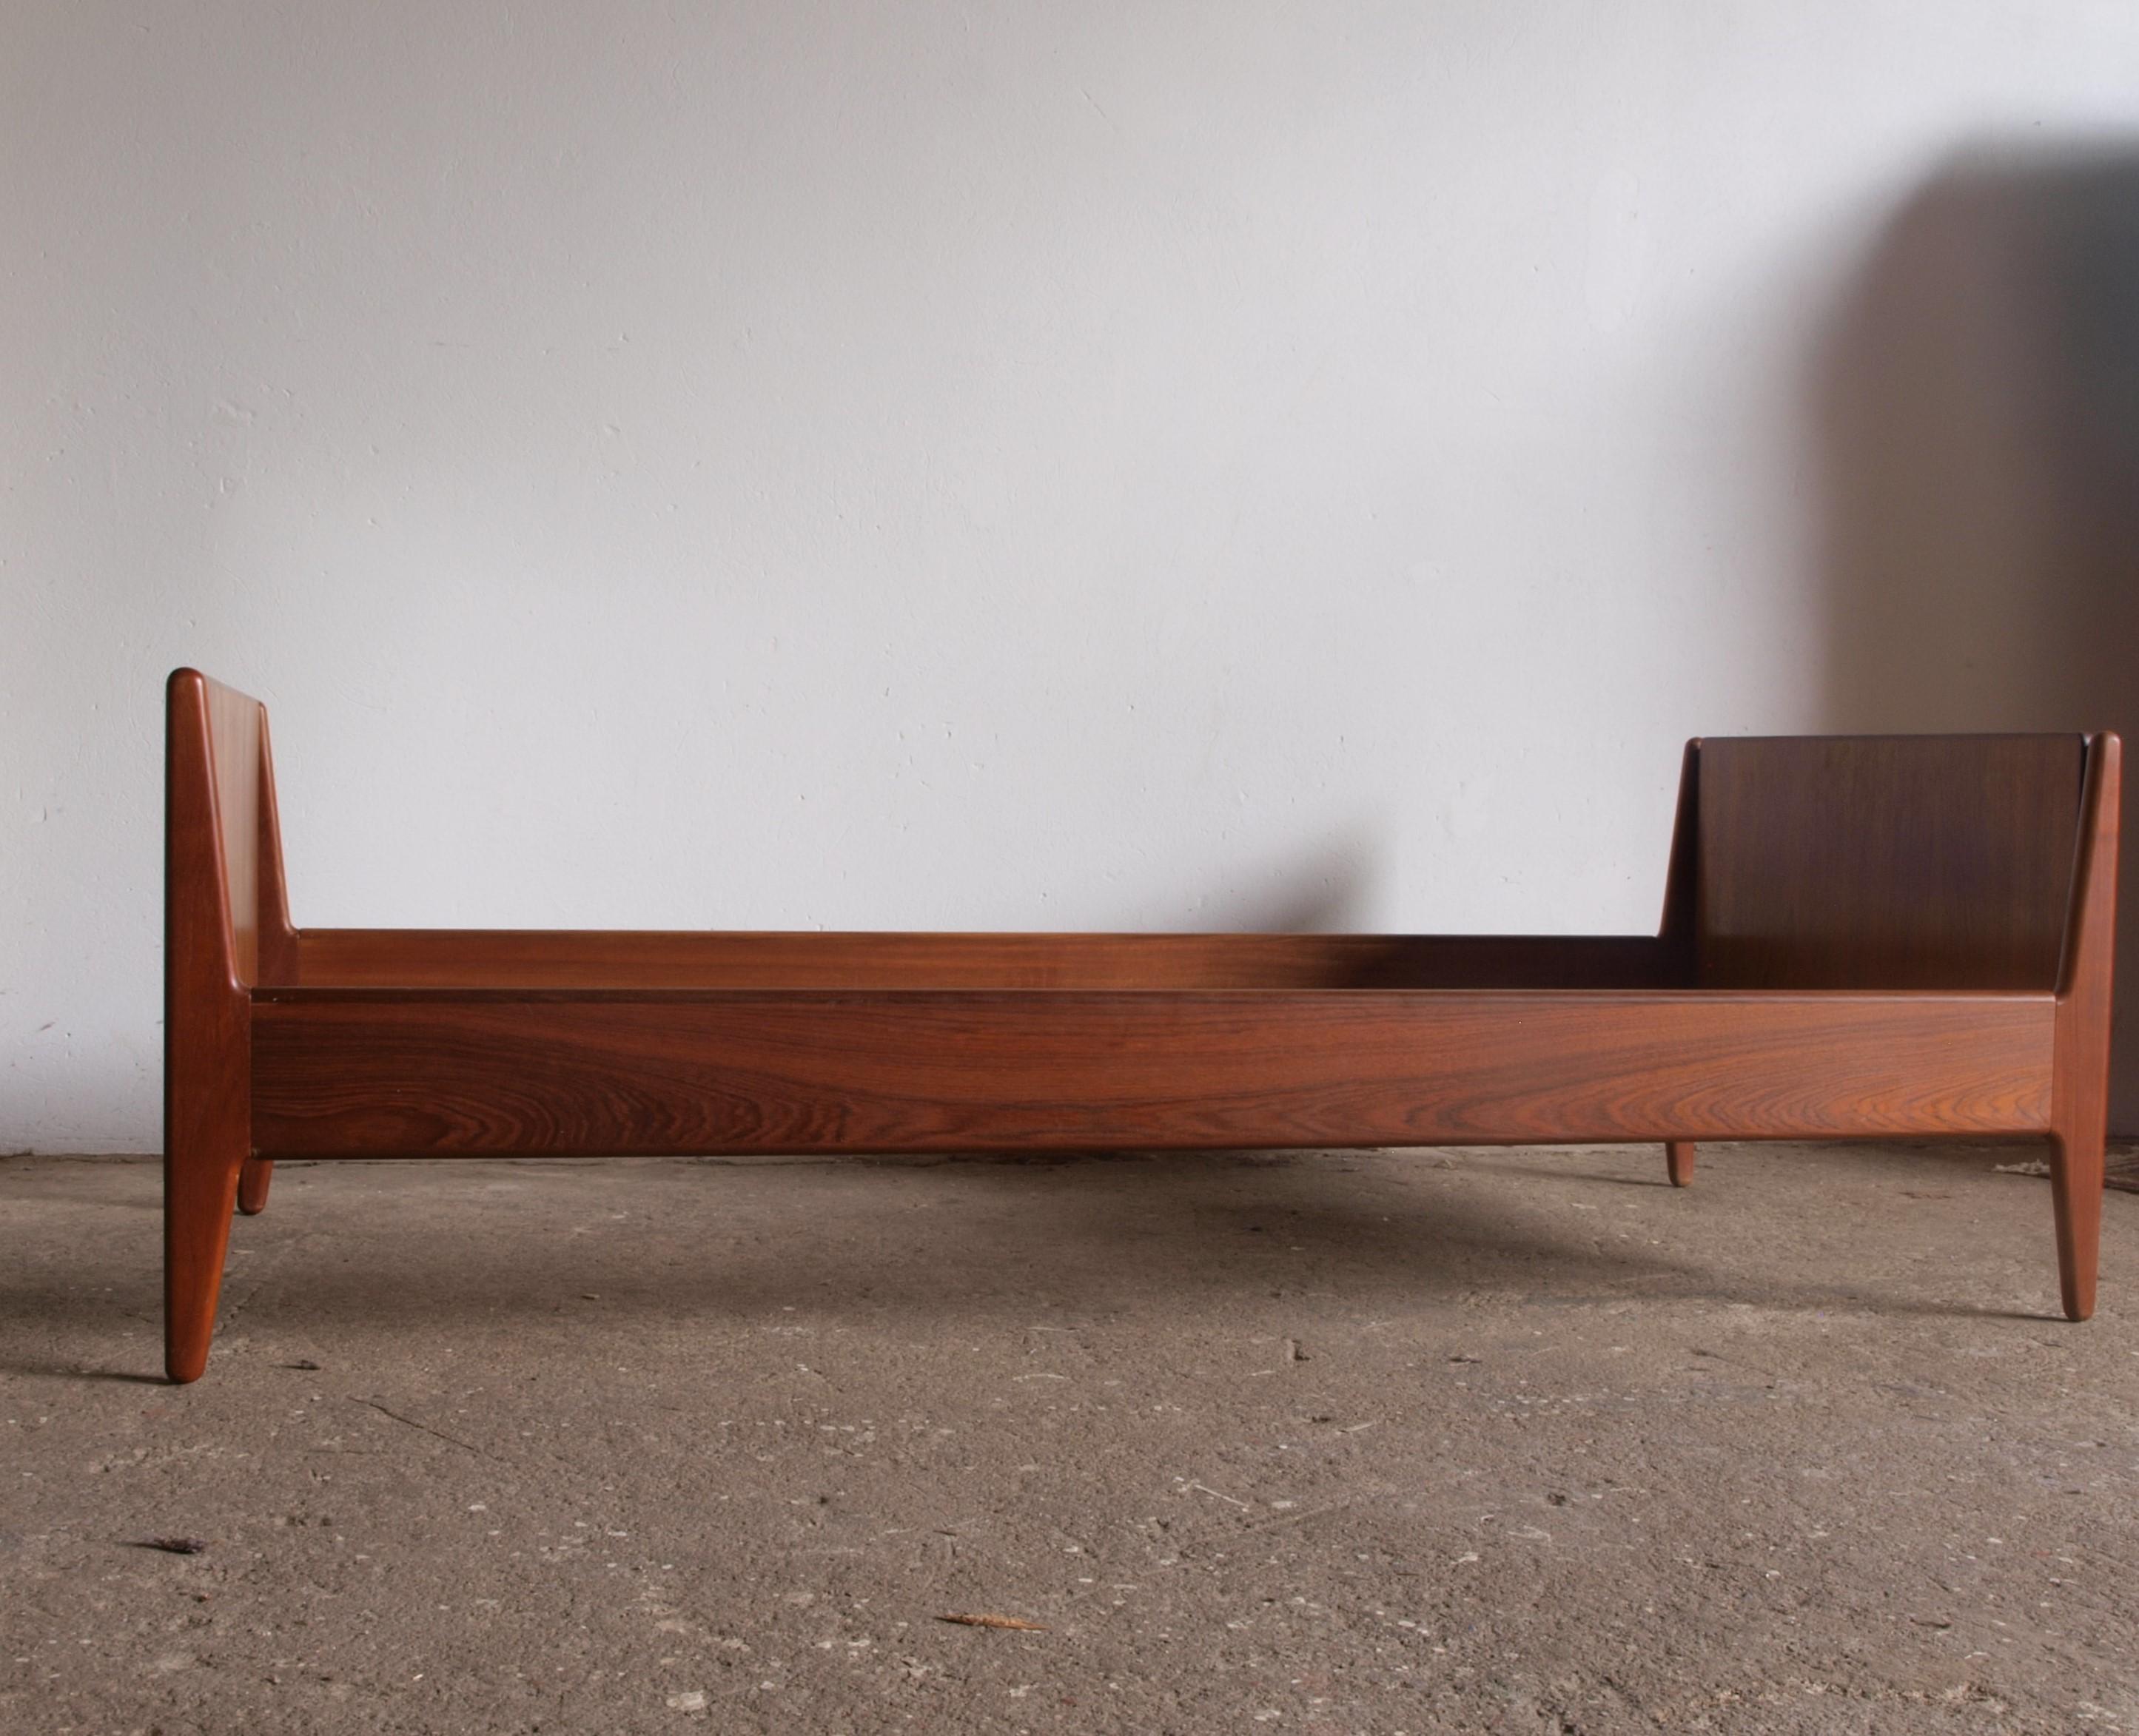 Beautiful teak single bed. The bed was designed by the design duo Arne Vodder & Anton Borg in the 1960s. The design duo Borg & Vodder had the bed manufactured by the renowned furniture manufacturer Vamo Møbelfabrik. An incredibly elegant and